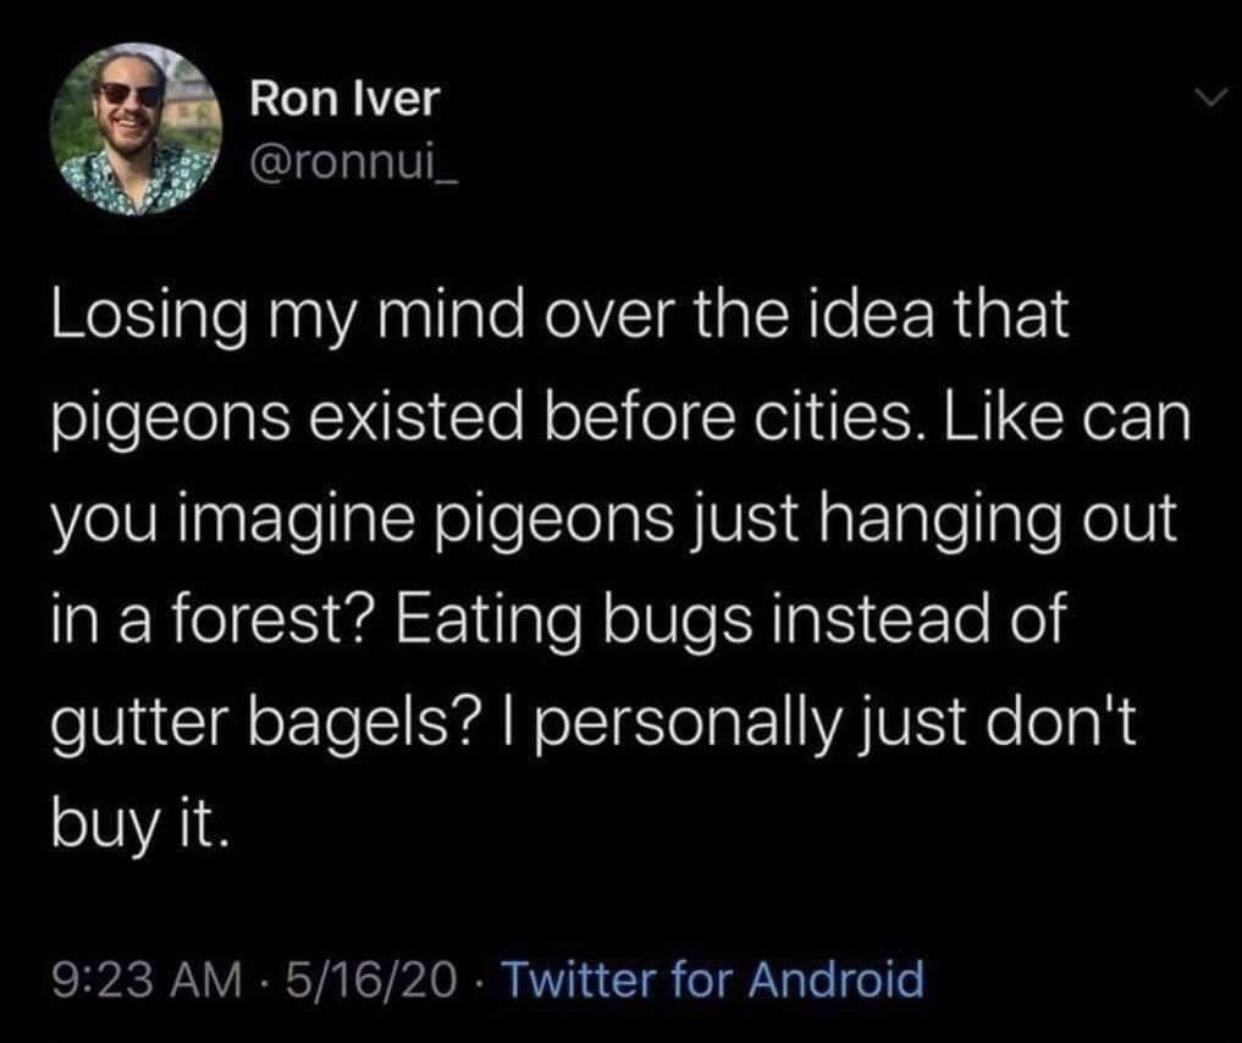 batman henchman meme - Ron Iver Losing my mind over the idea that pigeons existed before cities. can you imagine pigeons just hanging out in a forest? Eating bugs instead of gutter bagels? I personally just don't buy it. 51620 Twitter for Android